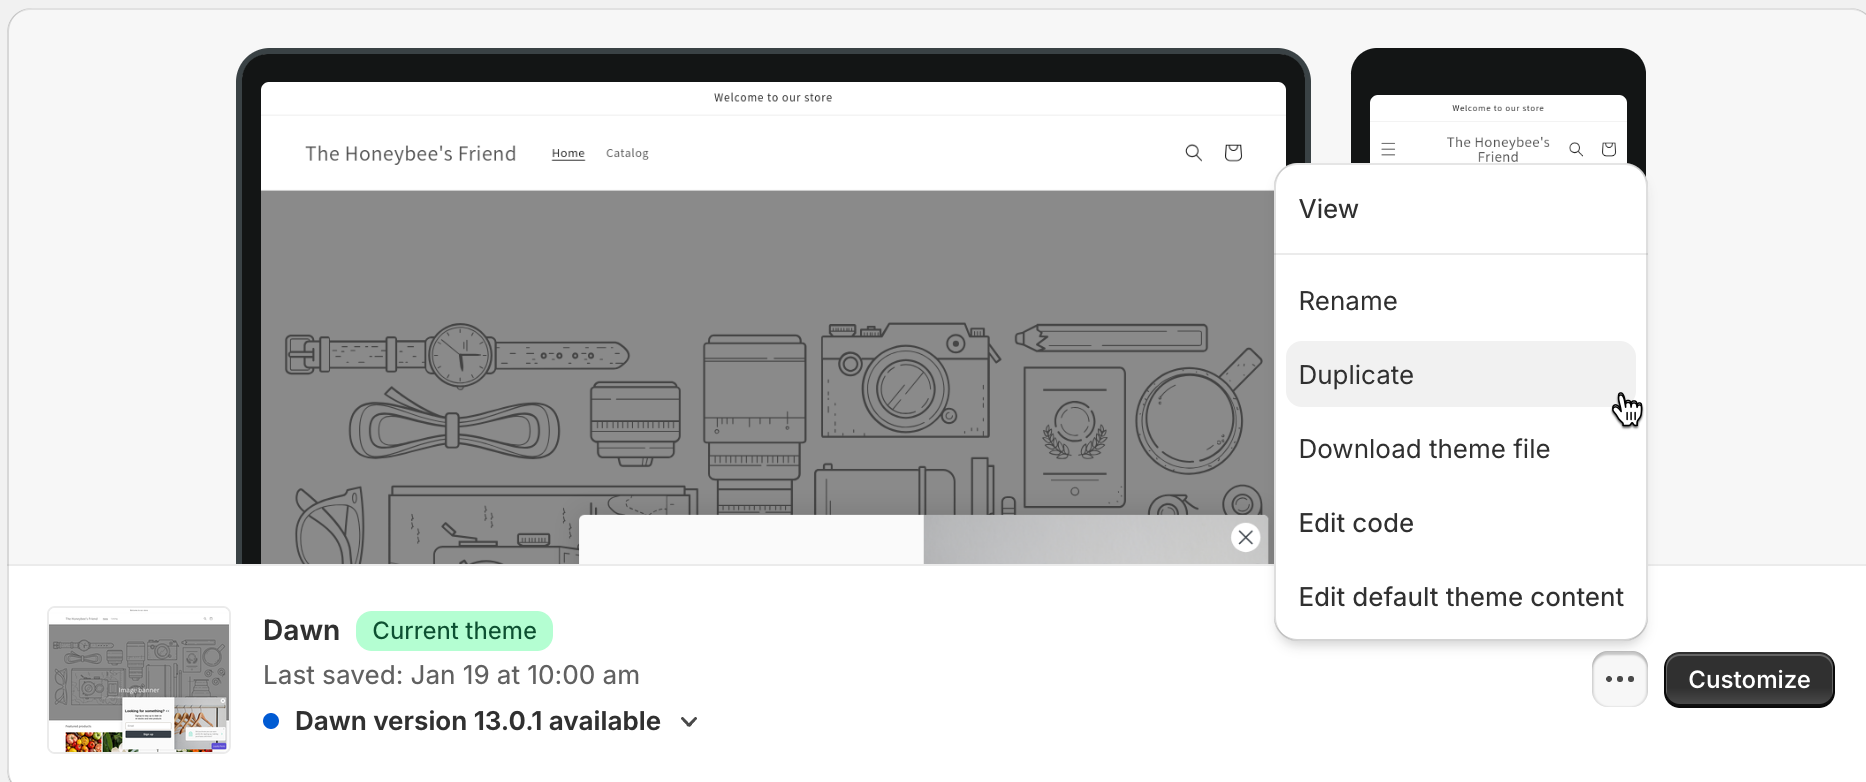 Shopify themes editor menu opened with "Duplicate" option shown on a theme